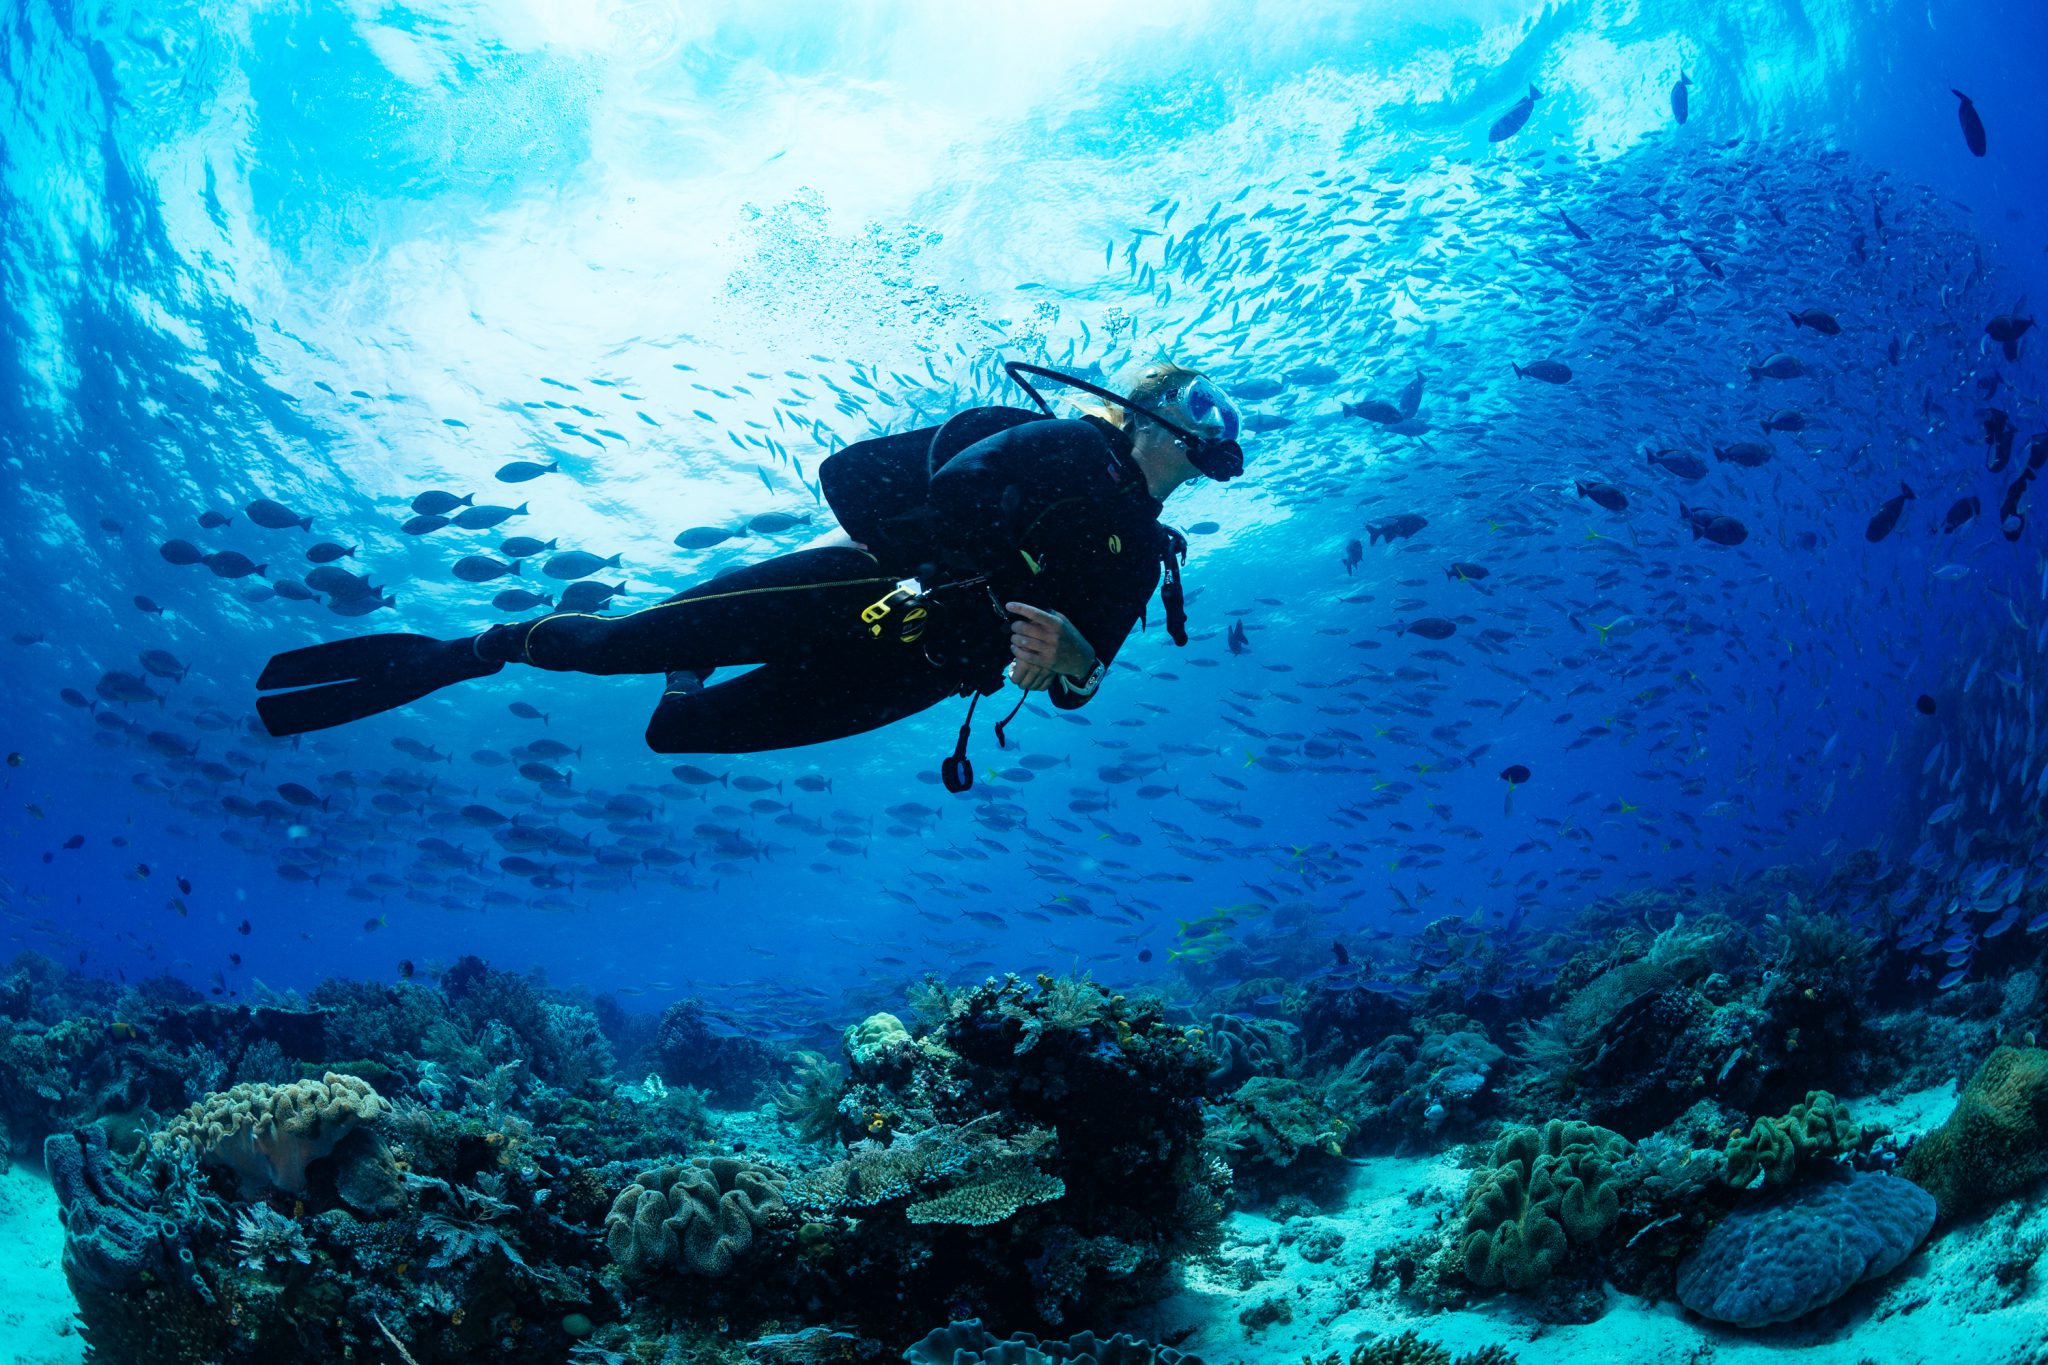 A scuba diver listening to relaxing underwater meditation sounds such as bubbles and fish on the coral reef around them